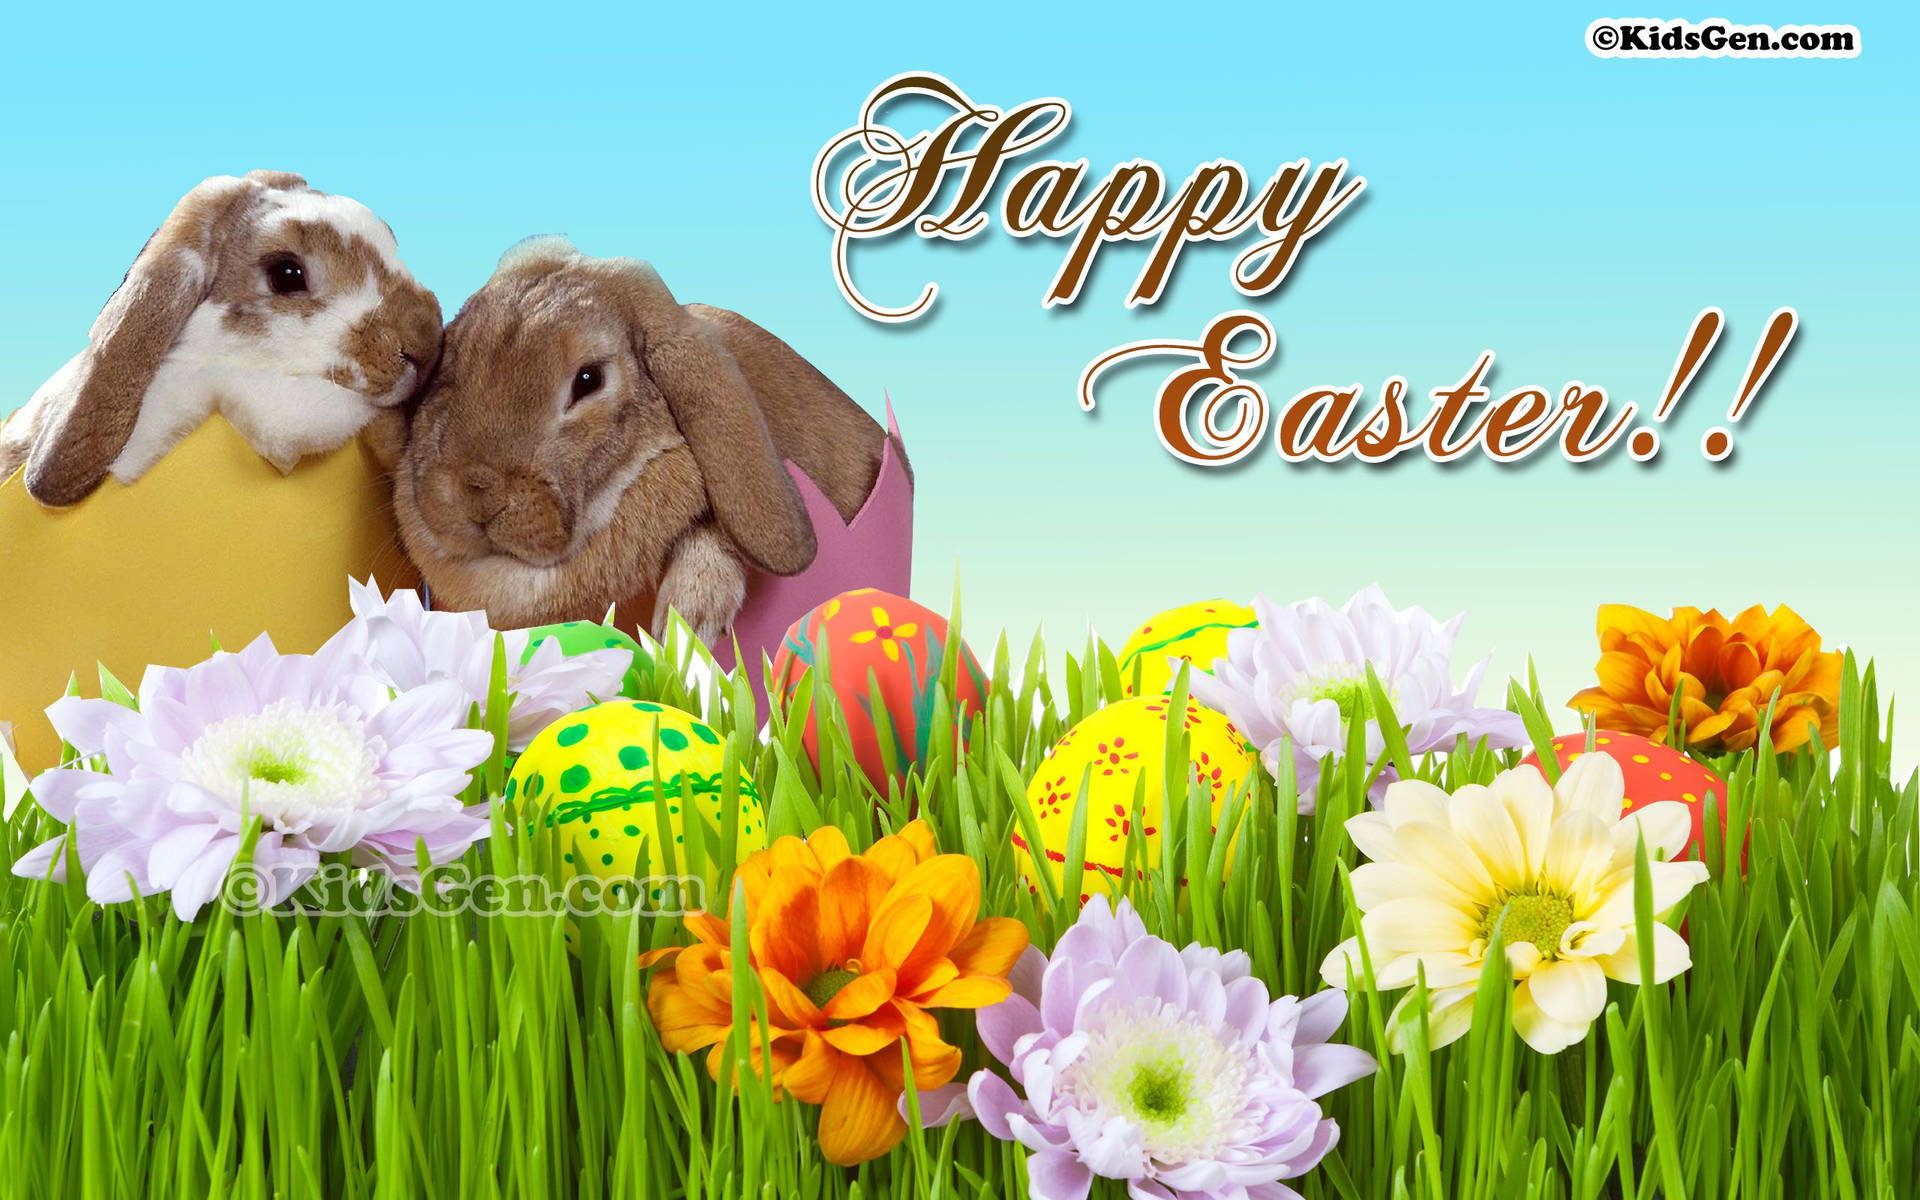 Celebrate Easter With A Colorful Rabbit And Egg Themed Festivity Background